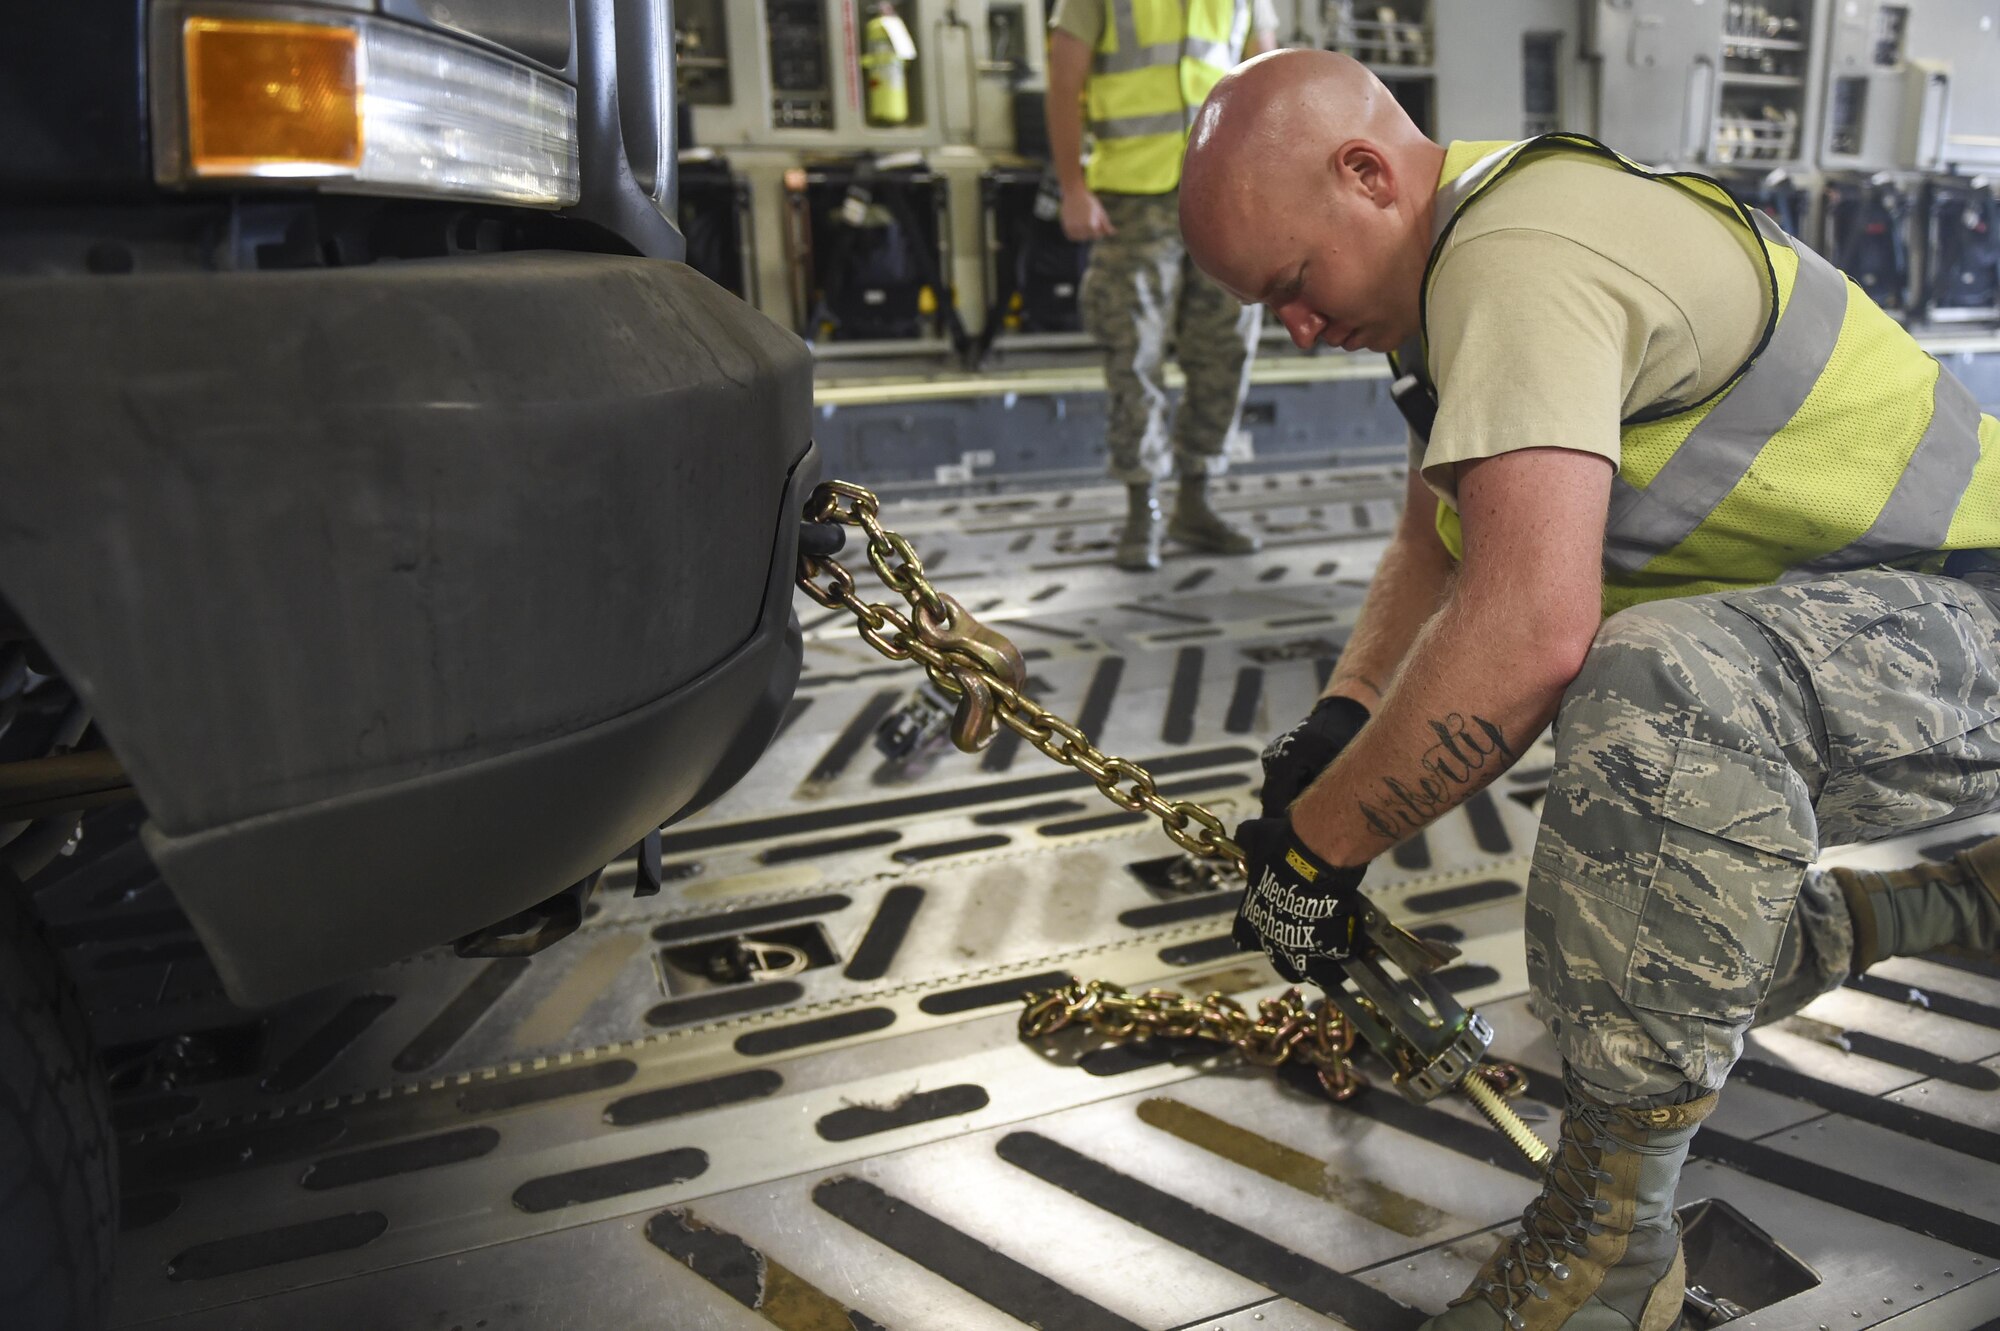 Staff Sgt. Lindsey McCoy, 78th Logistics Readiness Squadron assistant NCO in charge of passenger services, Robins Air Force Base, Ga., secures a truck with a cargo winchduring a cargo on load at Robins AFB Aug. 29.